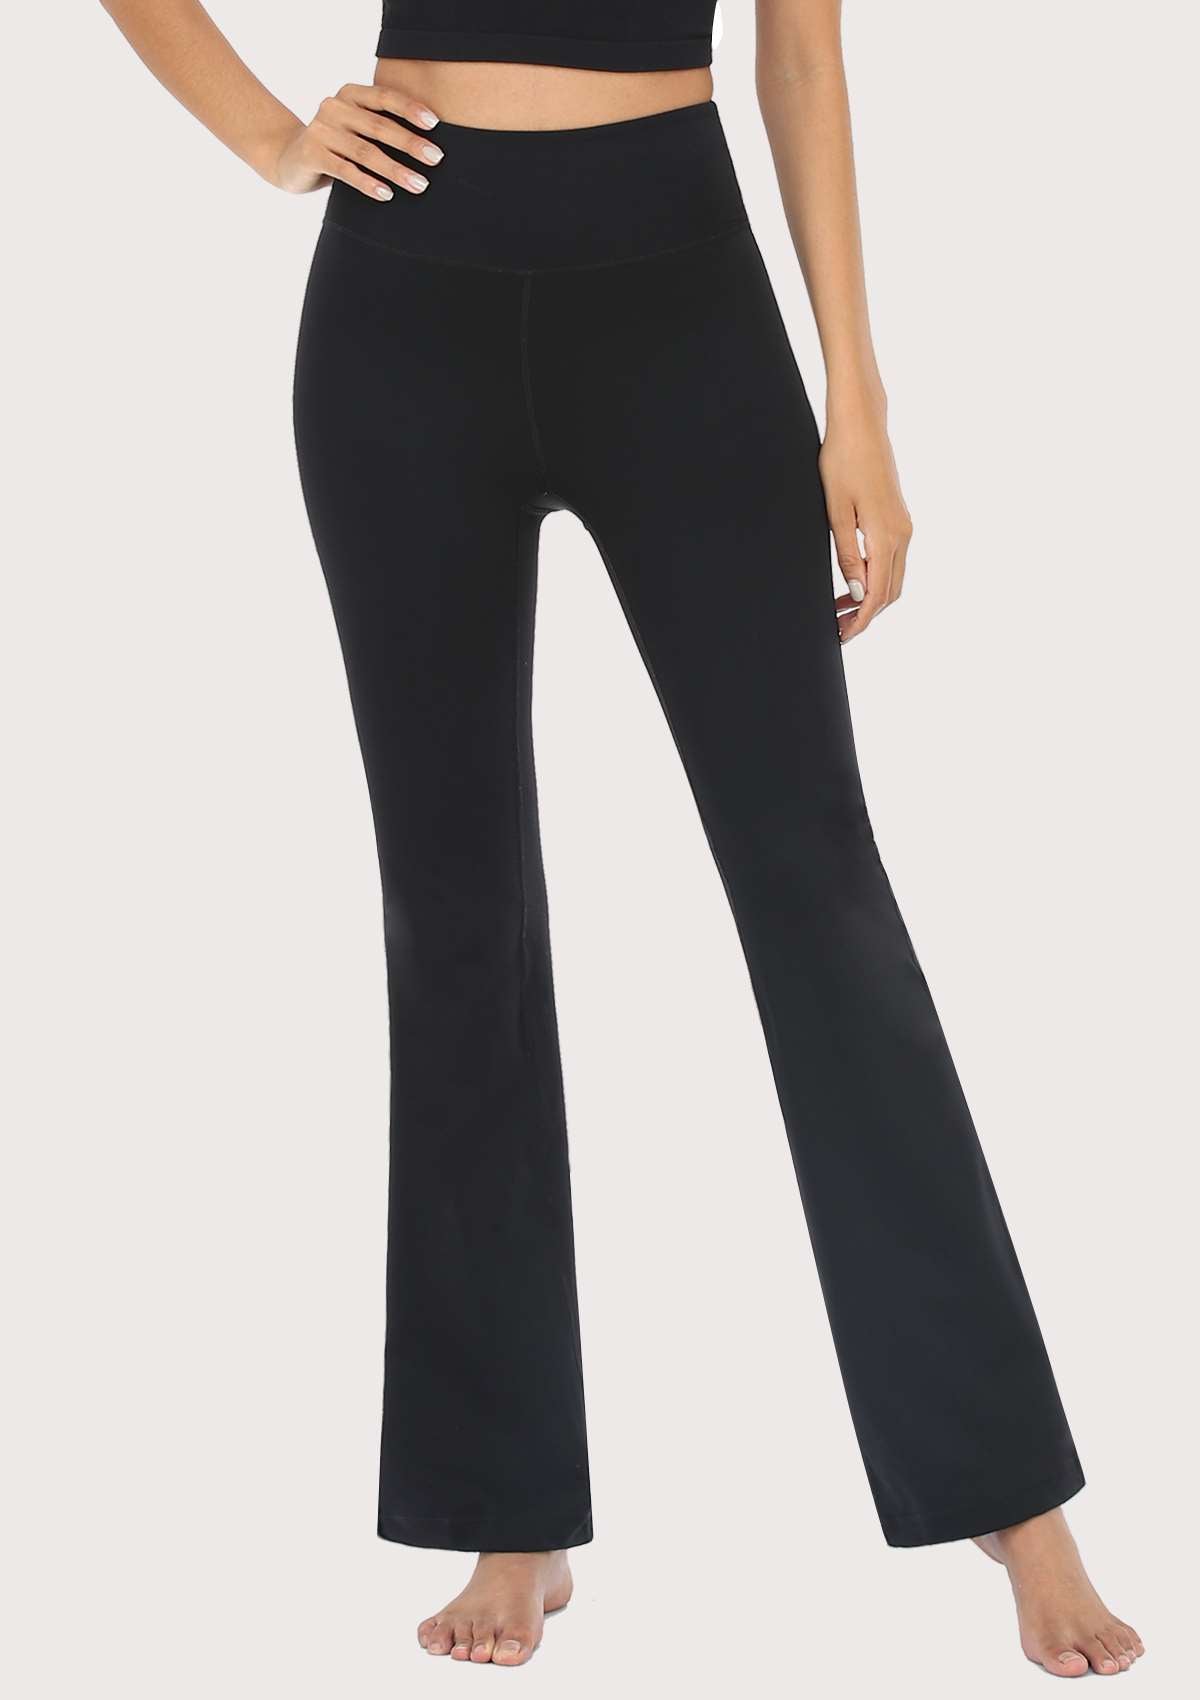 SONGFUL Smooth High Waisted Bootcut Yoga Sports Pants - L / Black